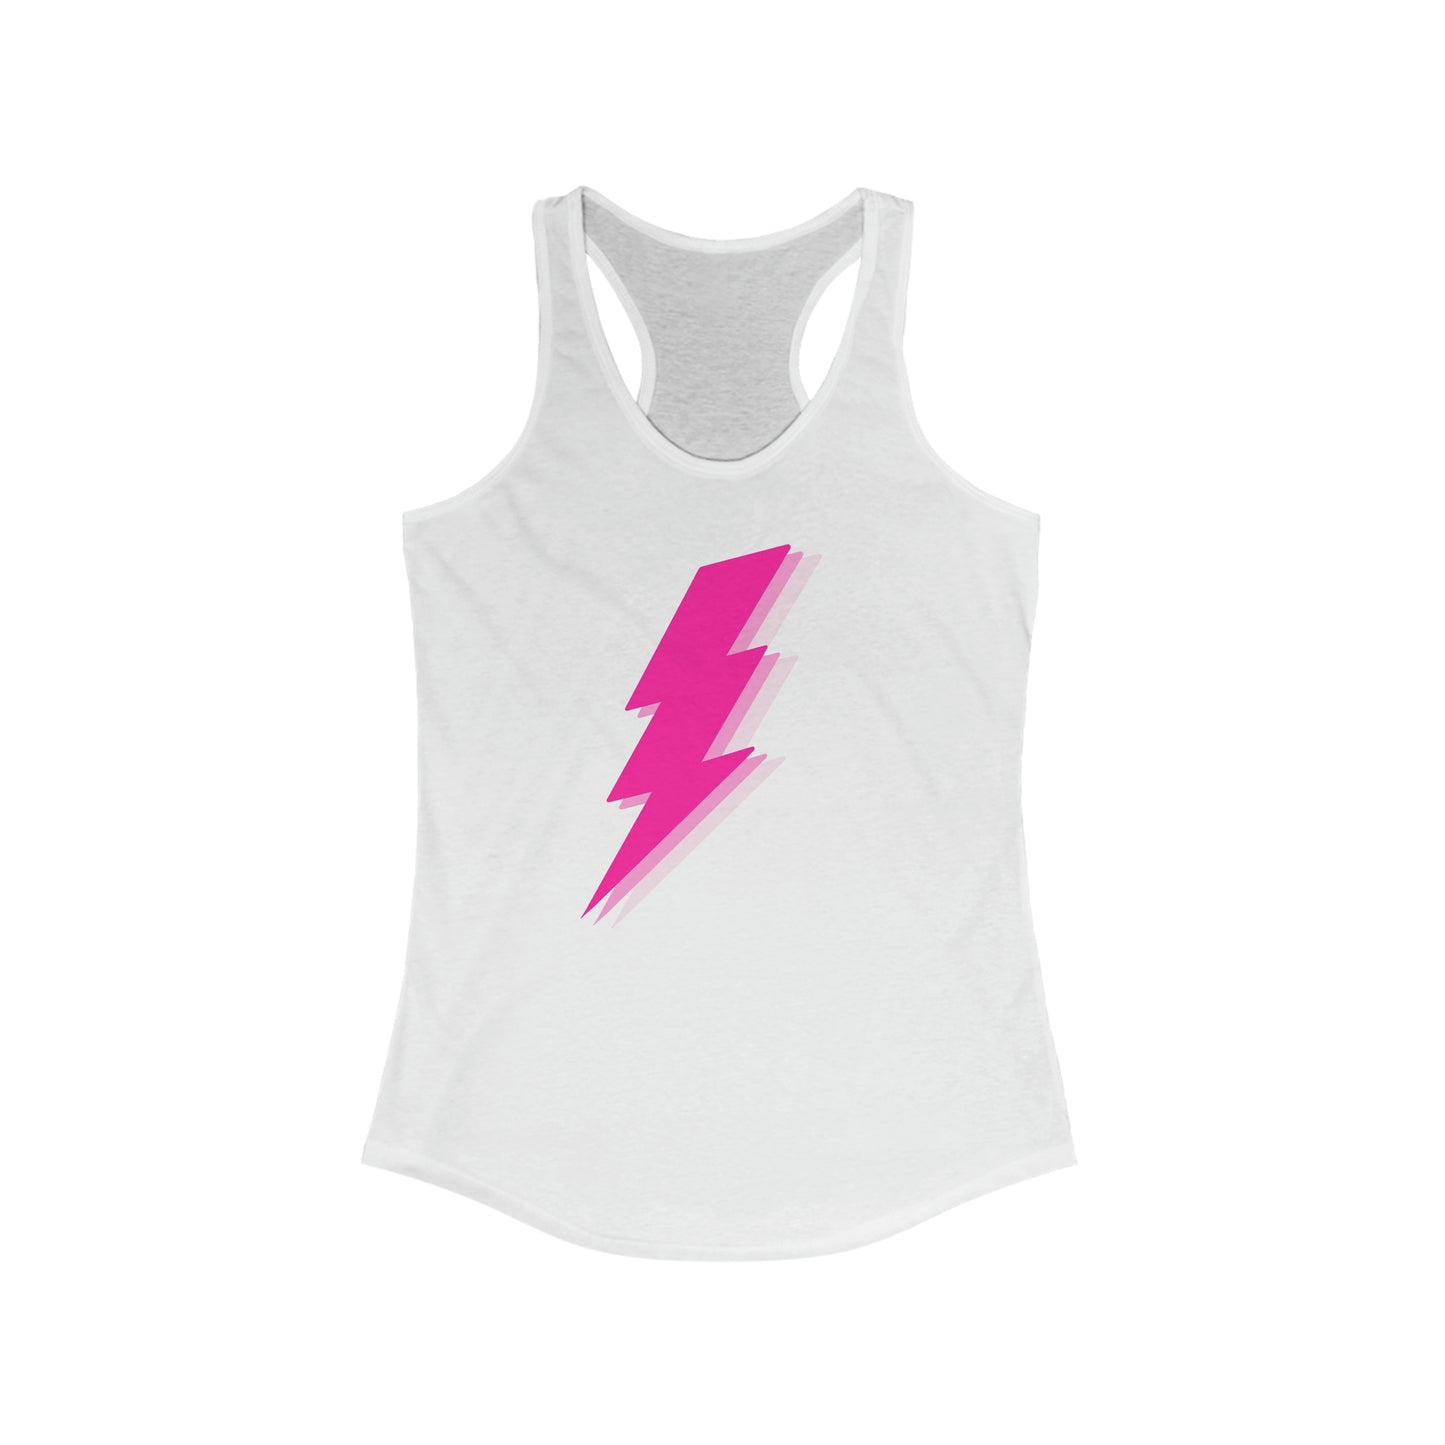 Lightening Racerback Tank Top with High-Quality Print: Lightweight, Comfy, and Stylish | Ideal for Active Lifestyles